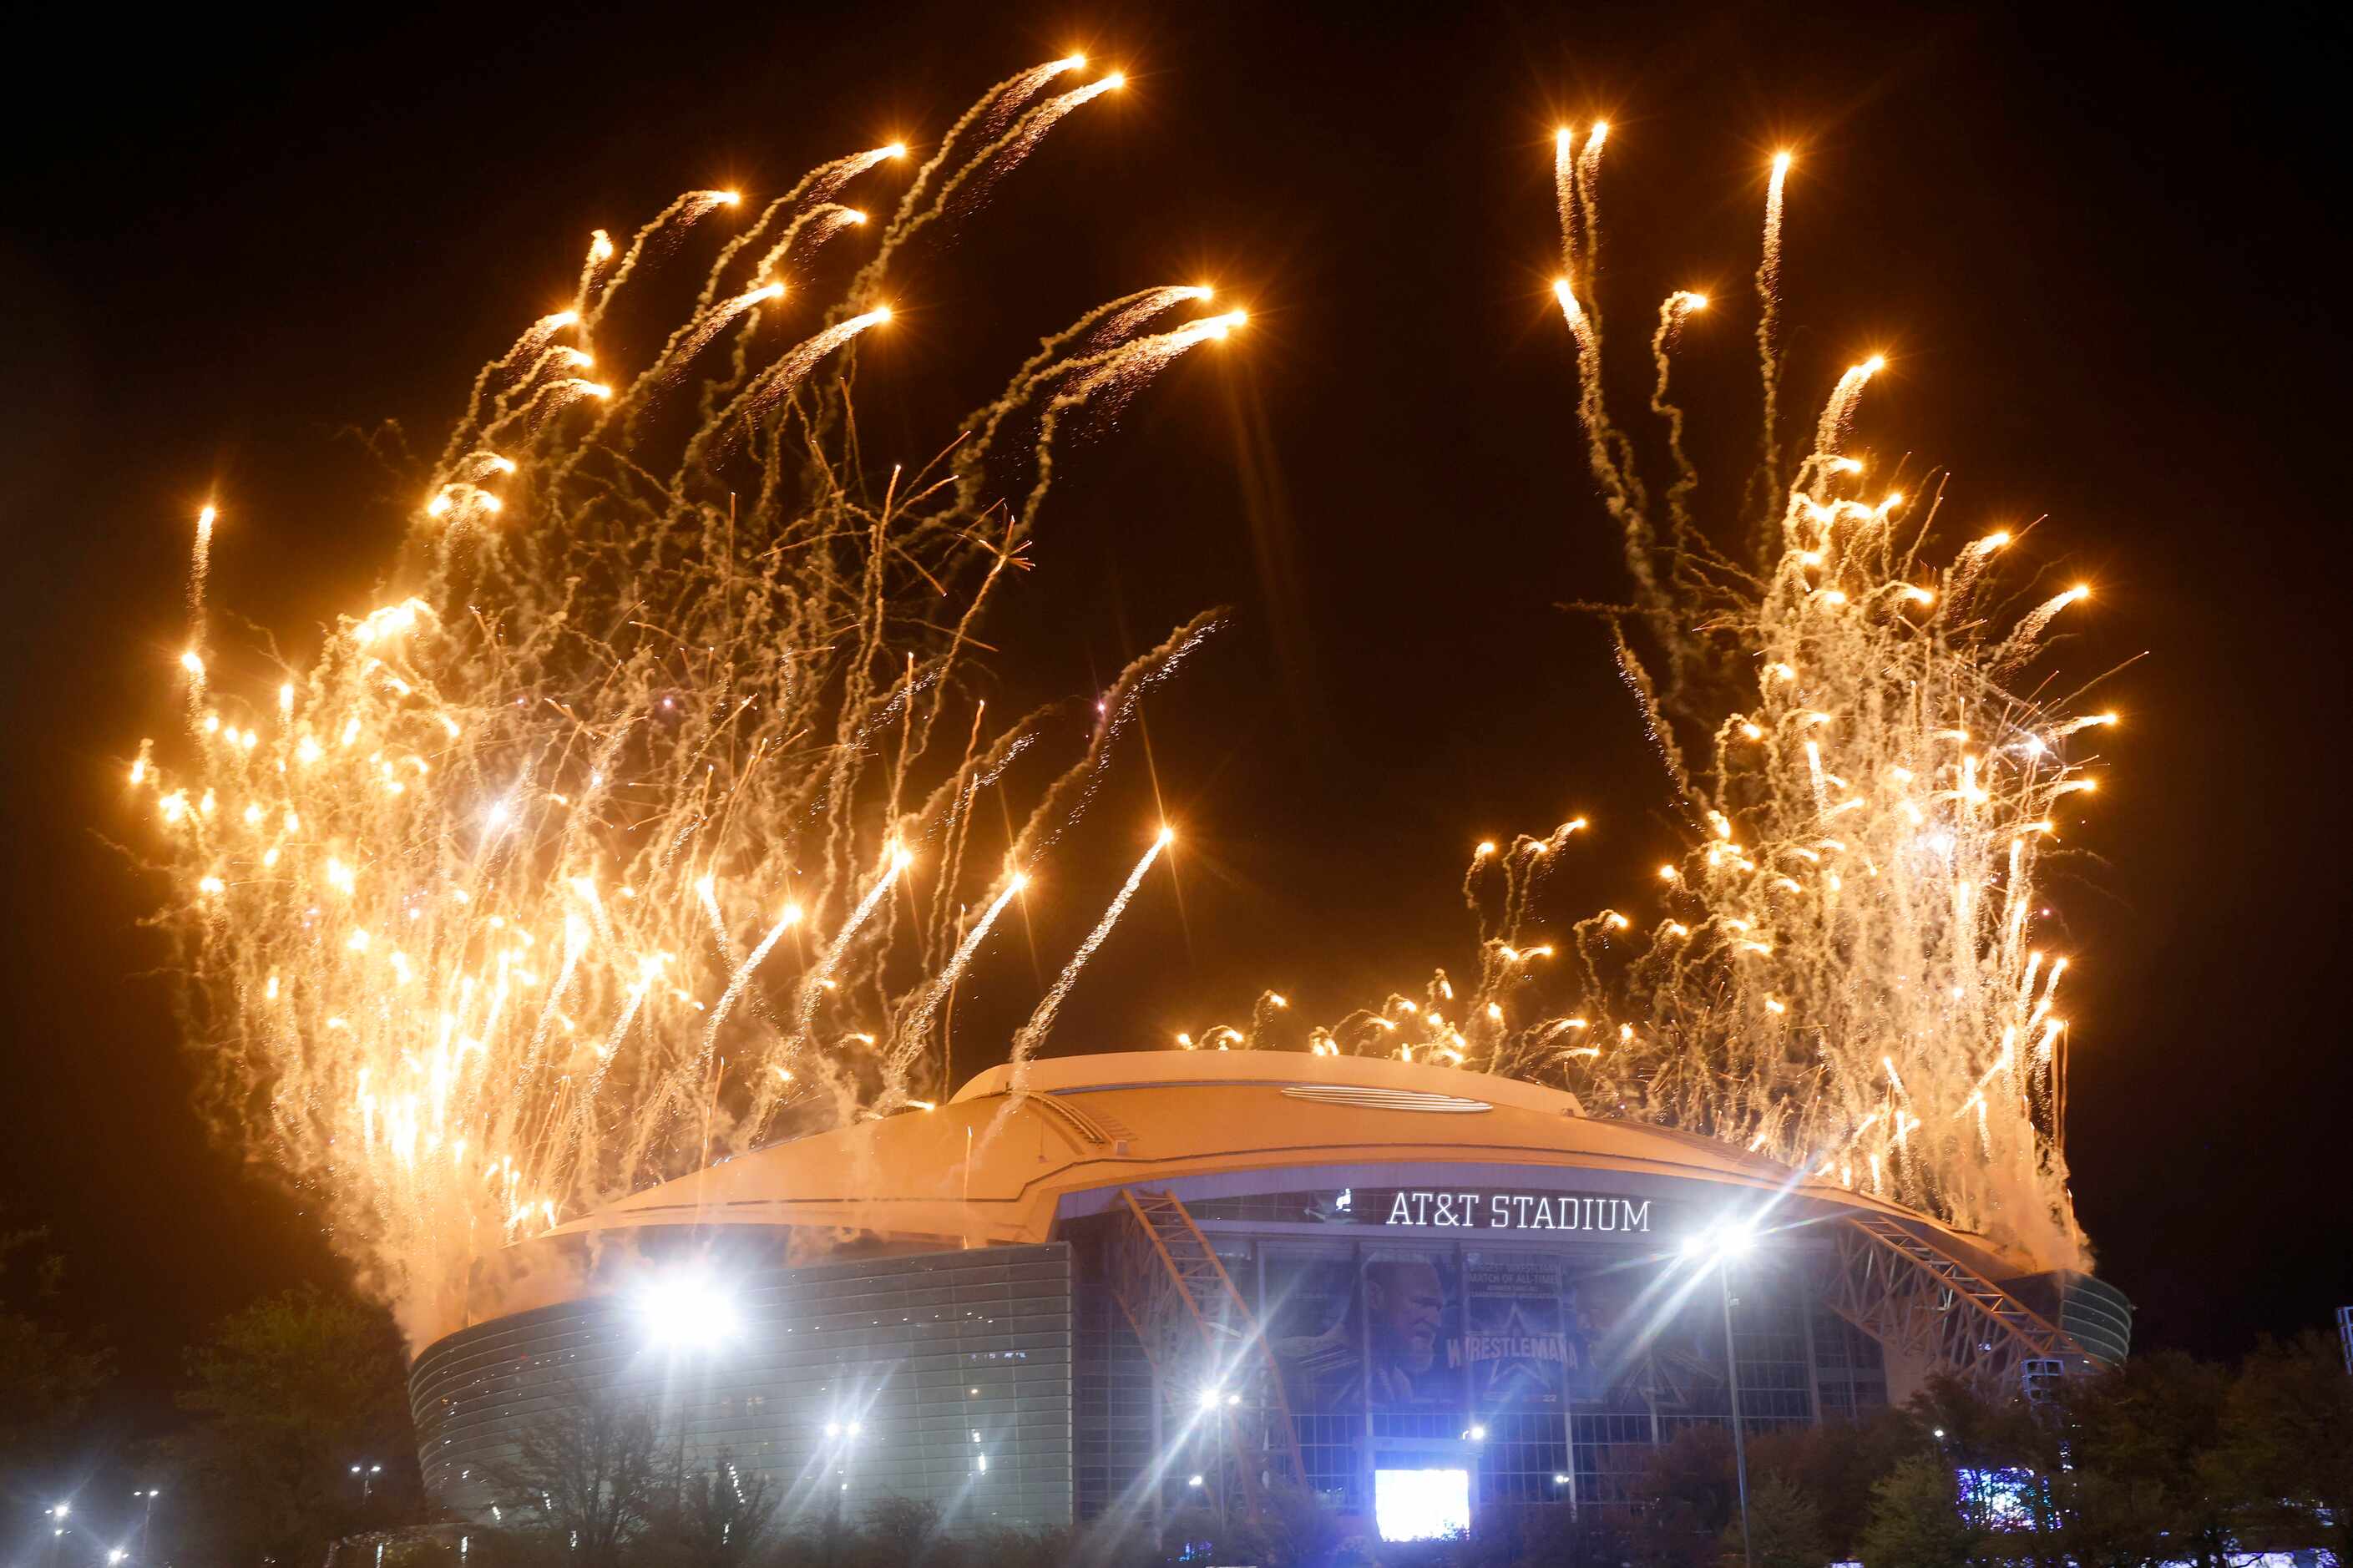 Fireworks go off over AT&T Stadium after WrestleMania in Arlington, Texas on Sunday, April...